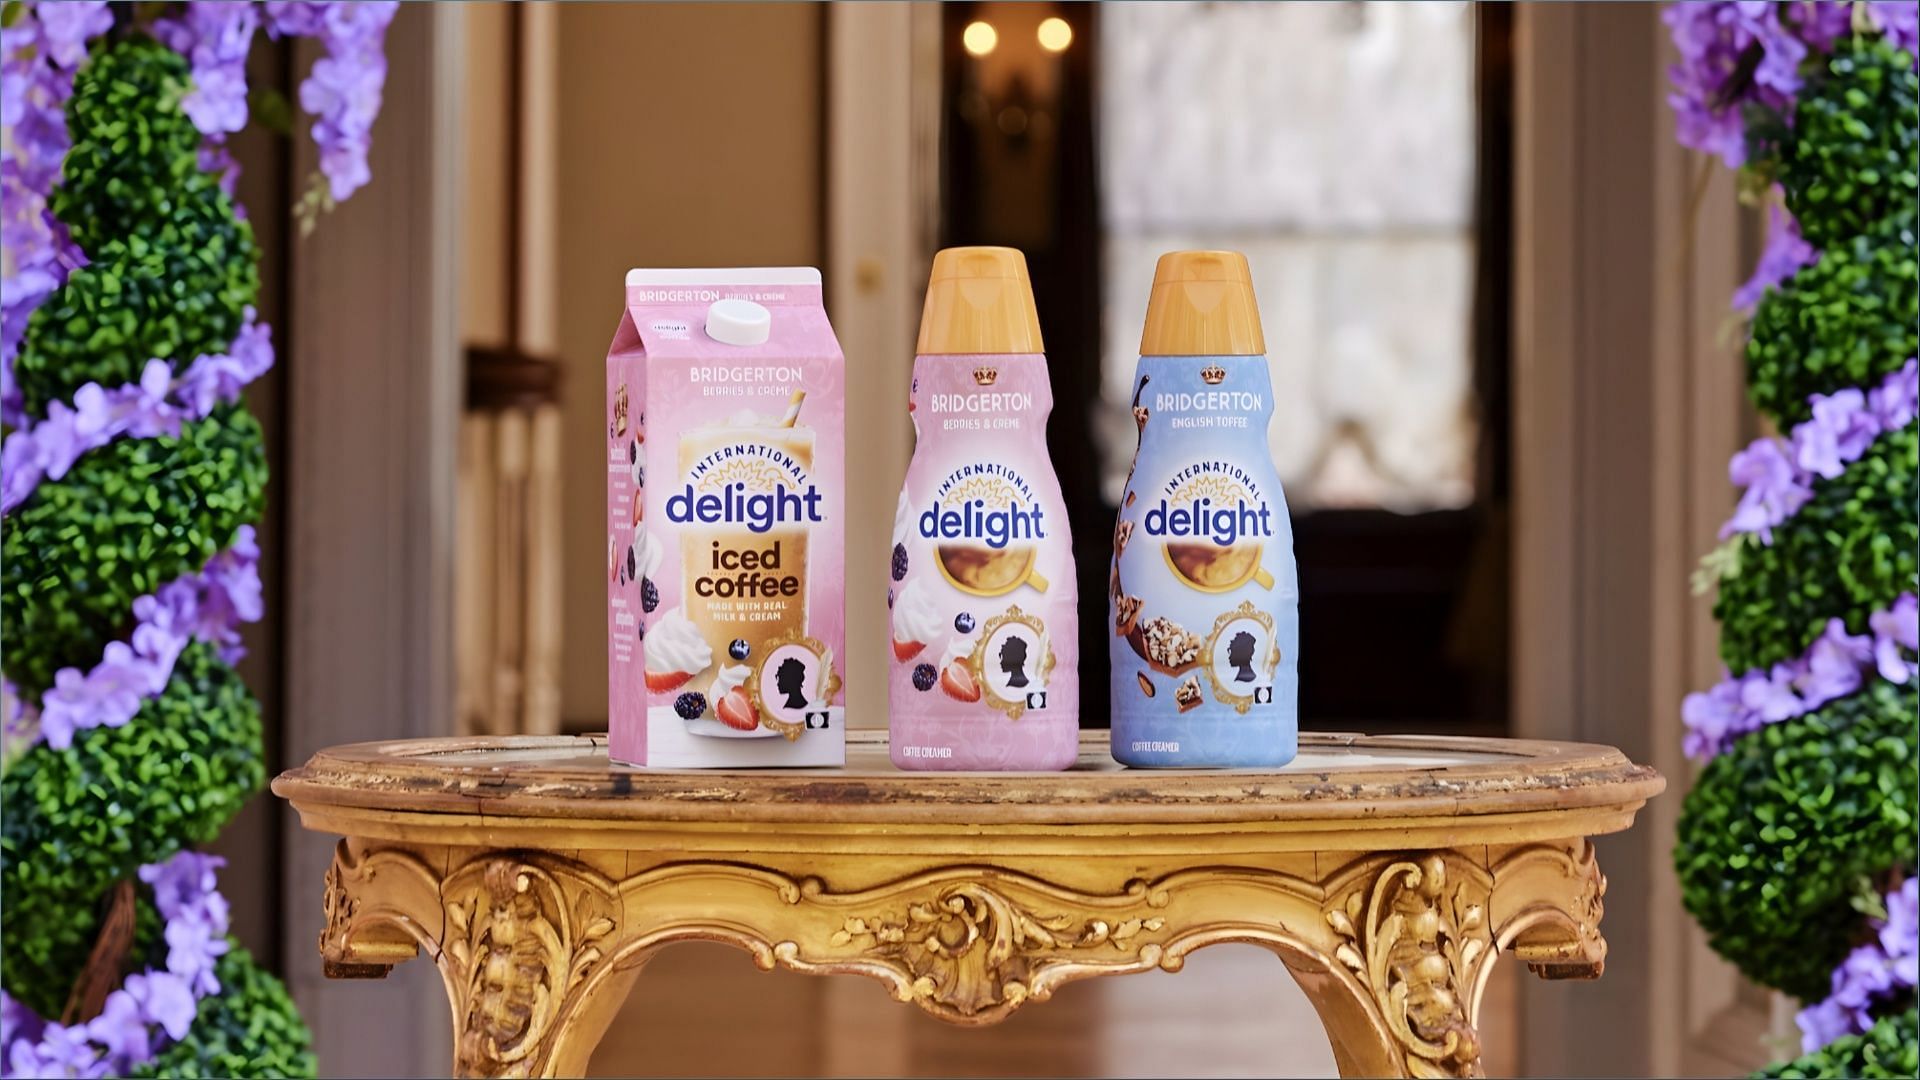 The new Coffee and Creamers will be available for a limited time only (Image via International Delight)